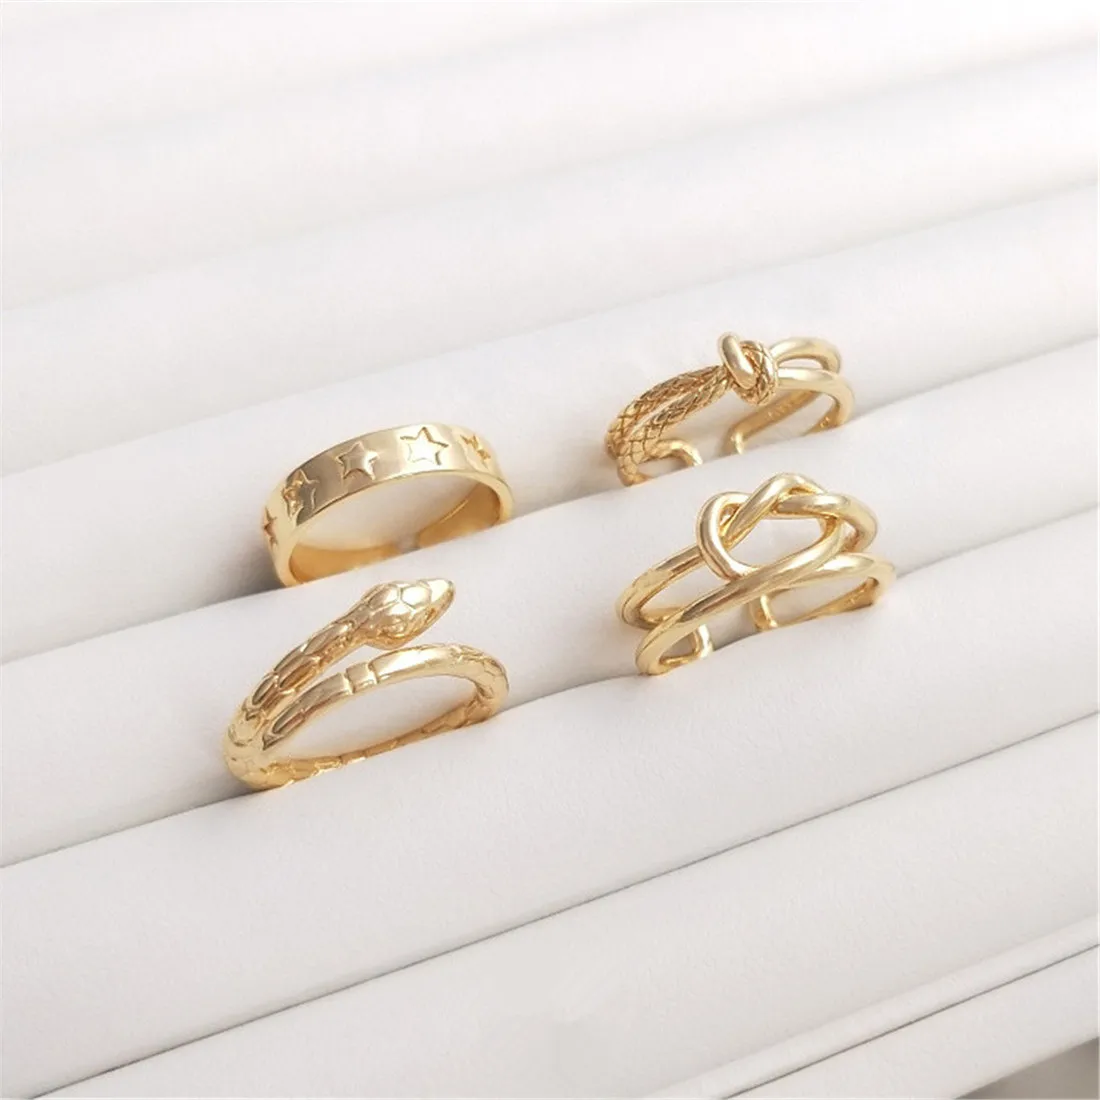 Fashionable 14K Gold-filled Knotted Ring Serpentine Ring Five-pointed Star Ring Light Luxury Internet Celebrity Index Finger Rin